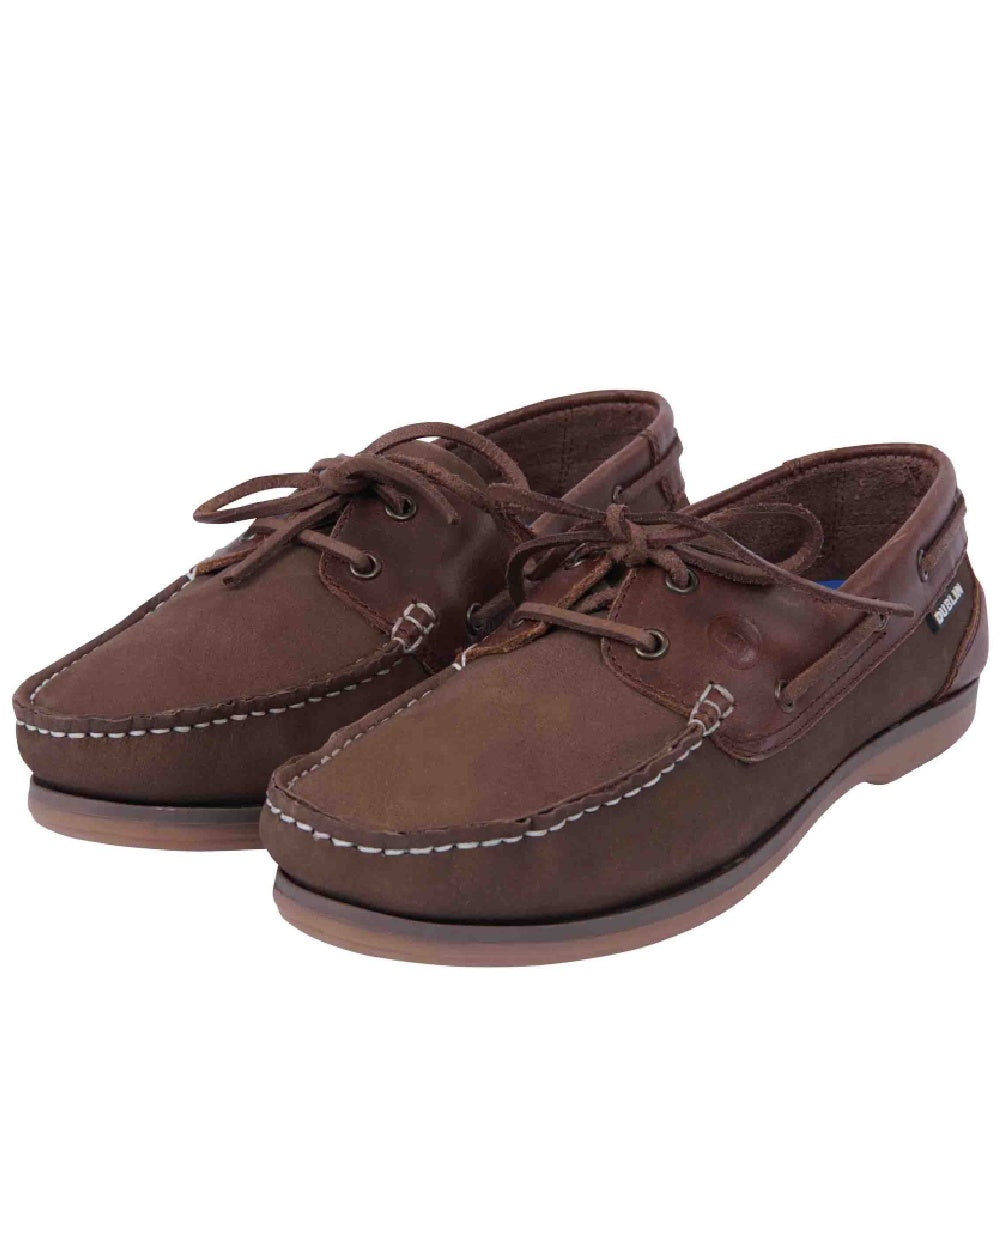 Dublin Broadfield Arena Shoes in Brown Chestnut 